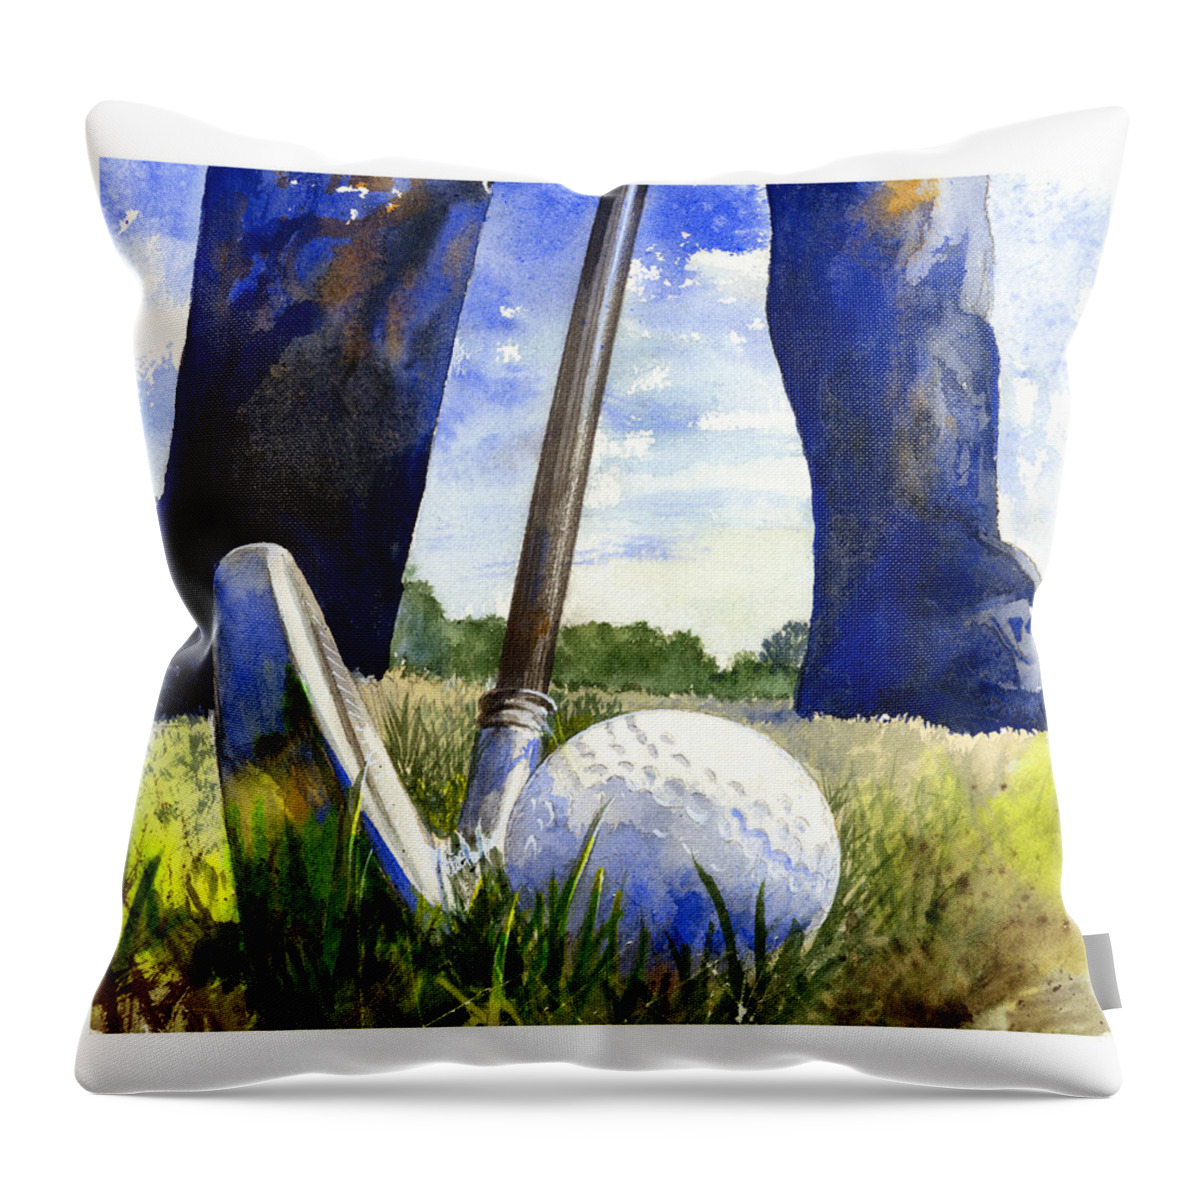 Watercolor Throw Pillow featuring the painting Anticipation by Andrew King